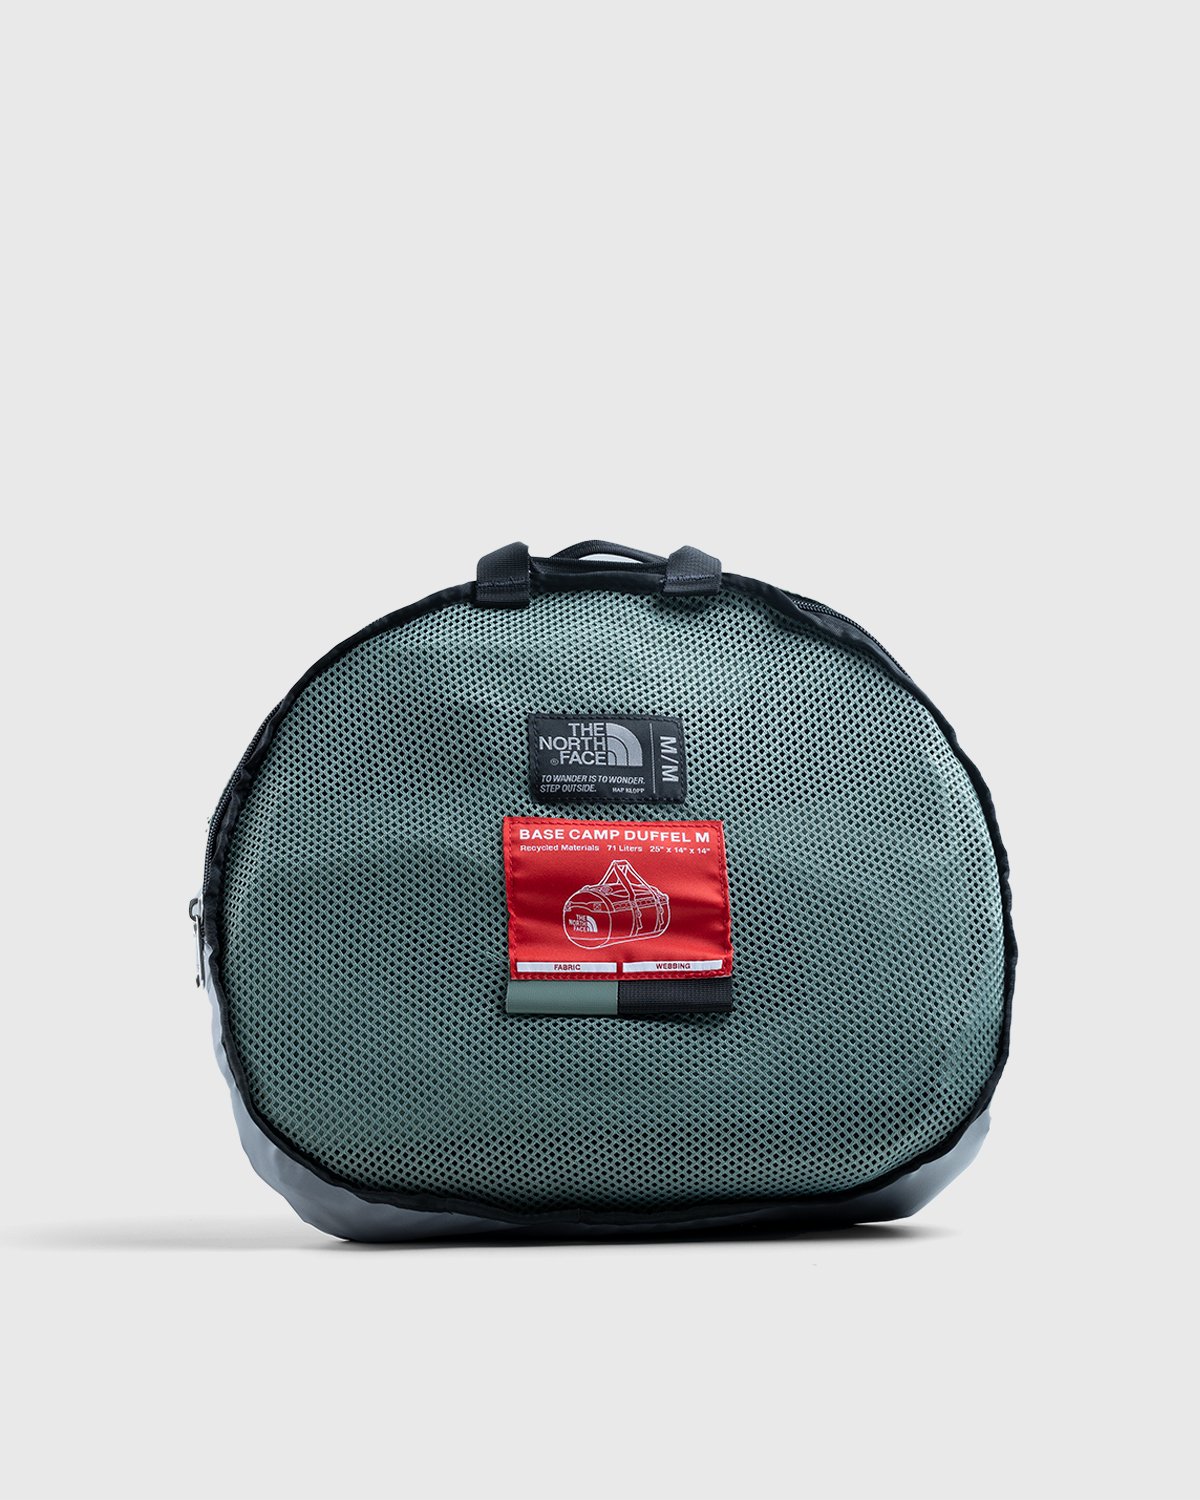 The North Face - Medium Base Camp Duffel - Accessories - Green - Image 2